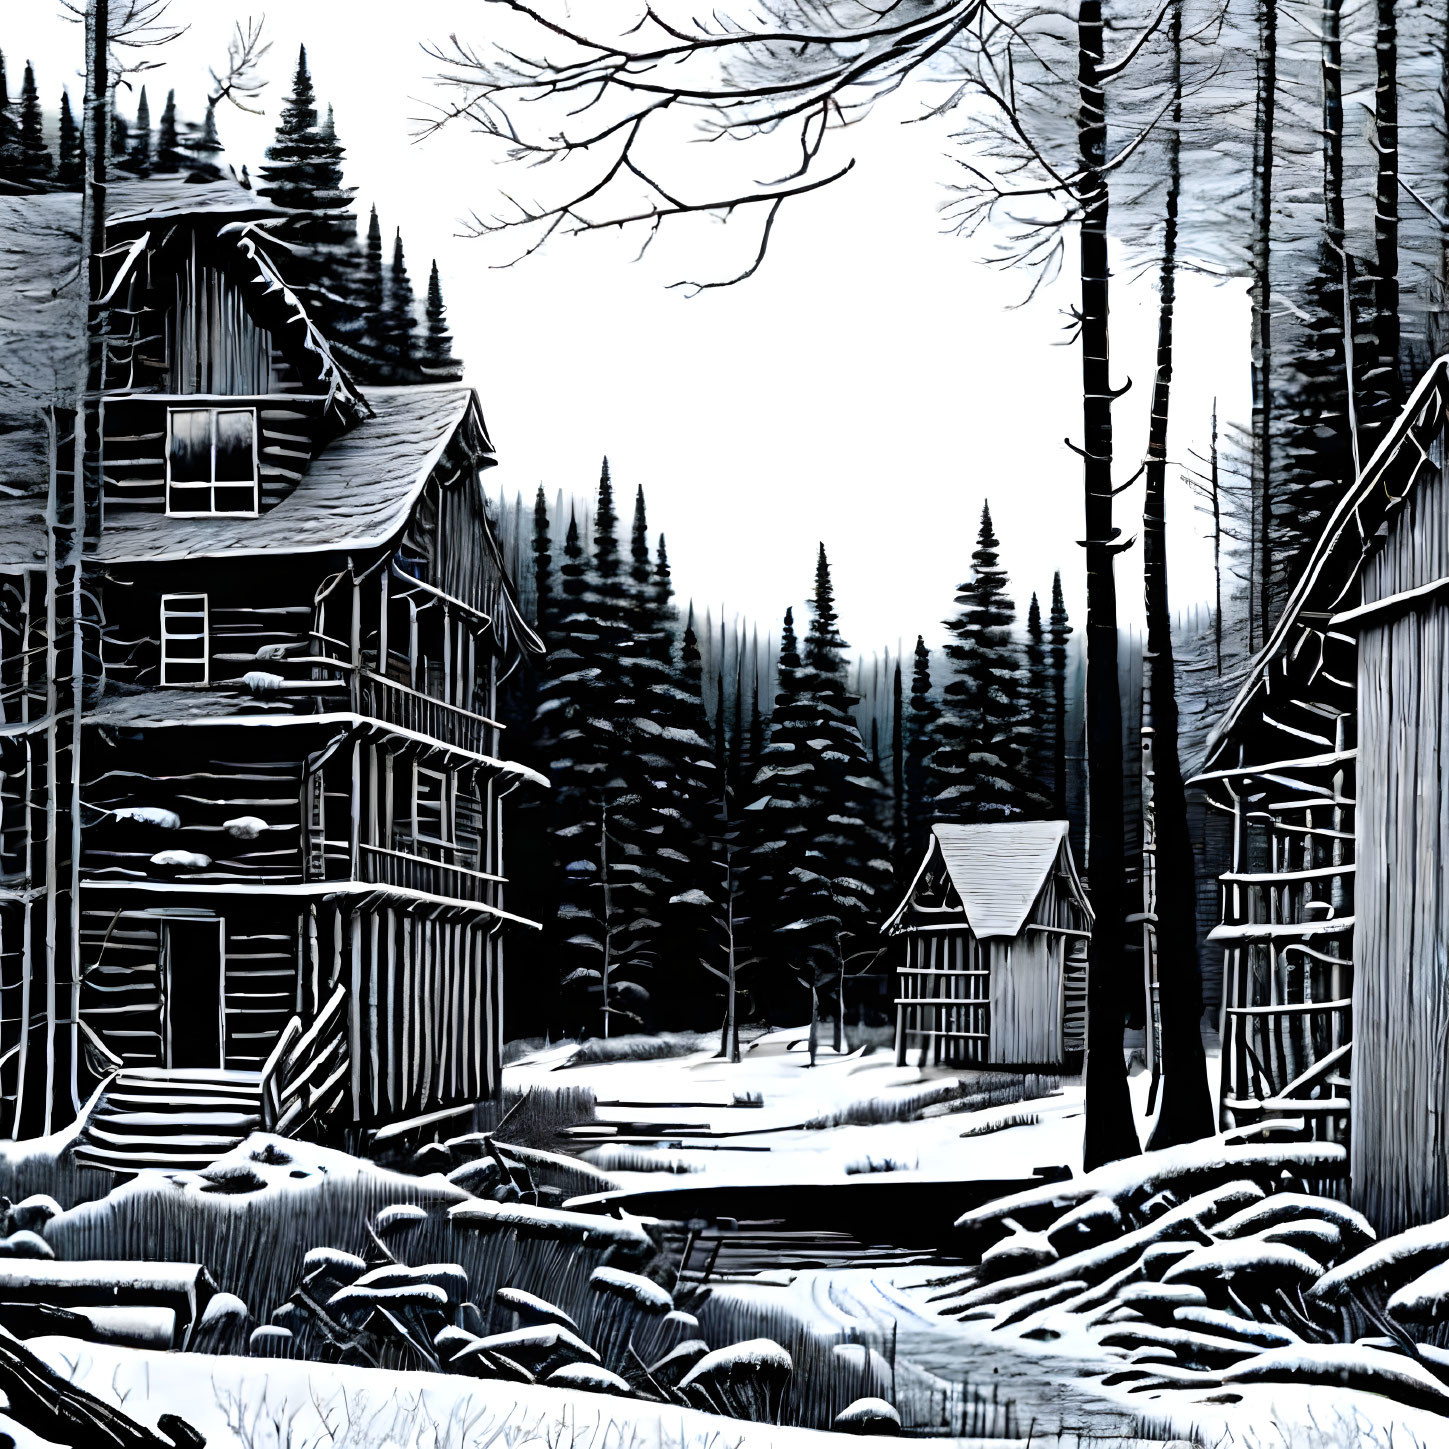 Winter at the Lumber Camp